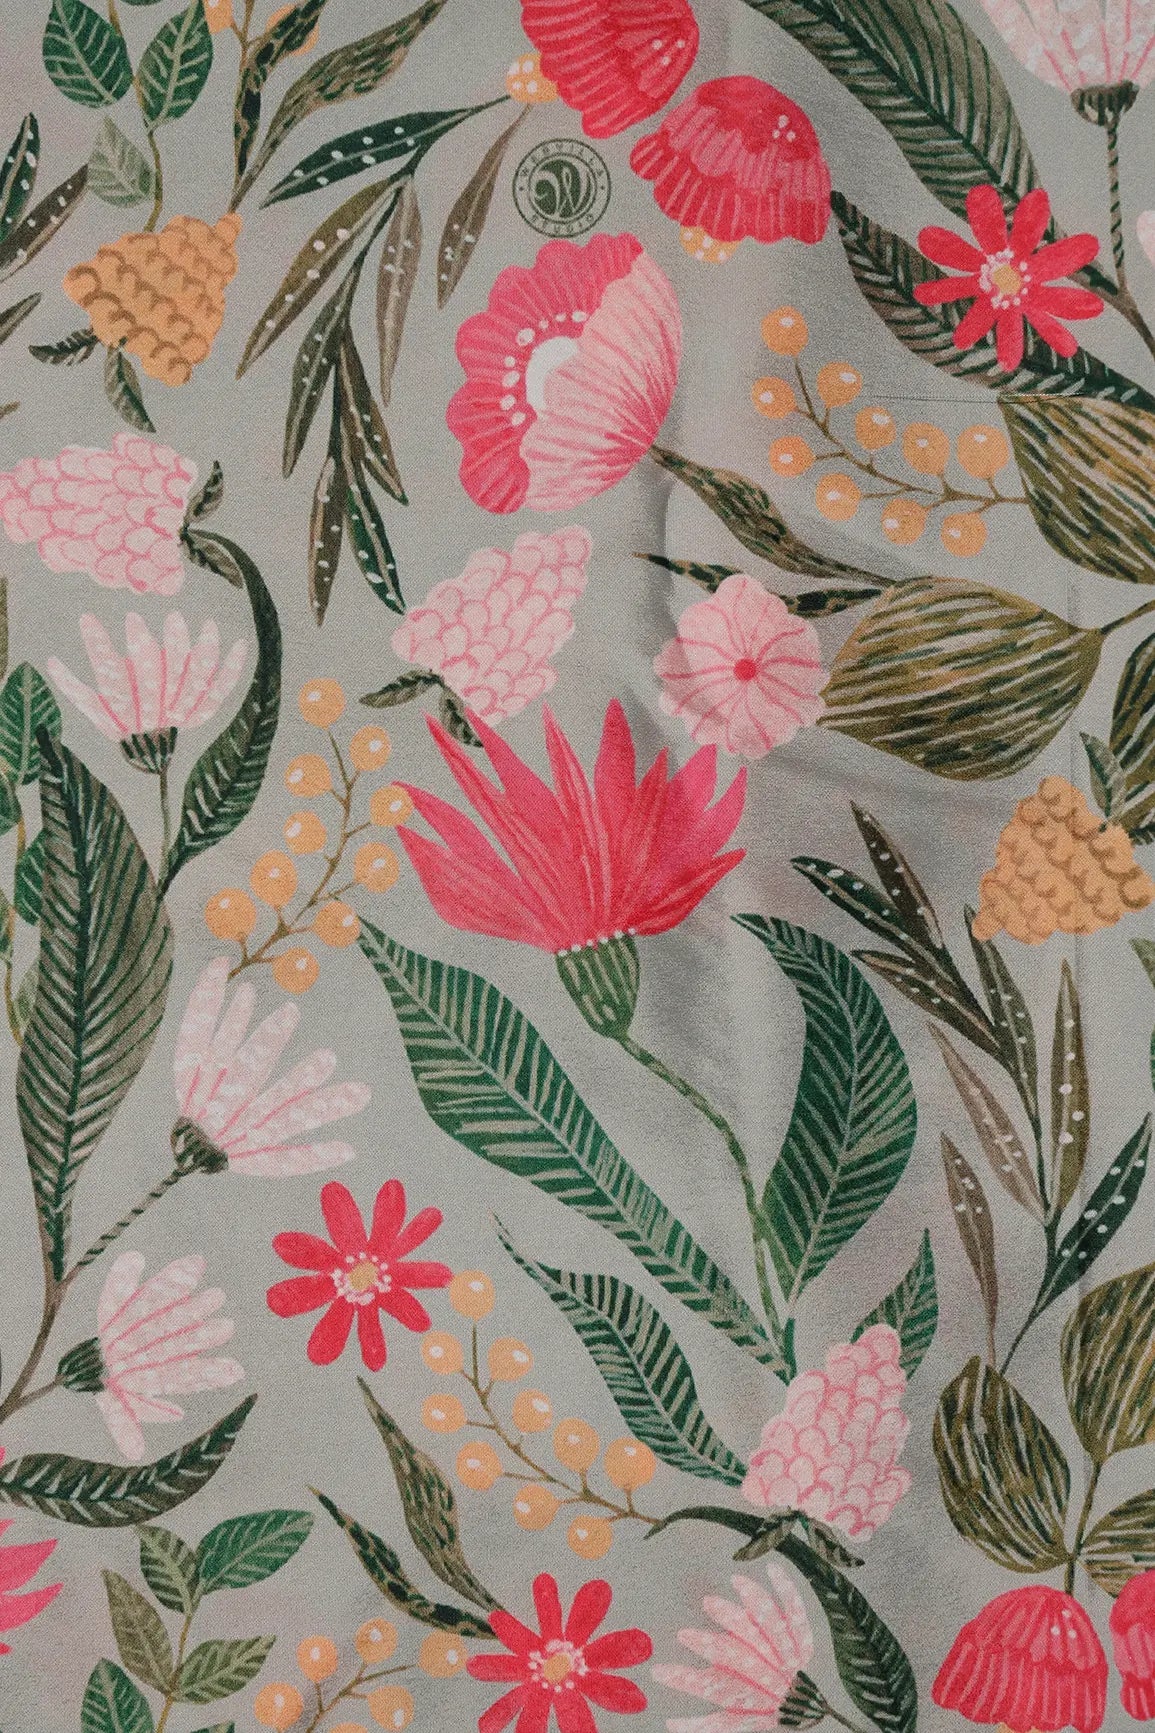 Light Grey And Pink Floral Pattern Digital Print On French Crepe Fabric - doeraa